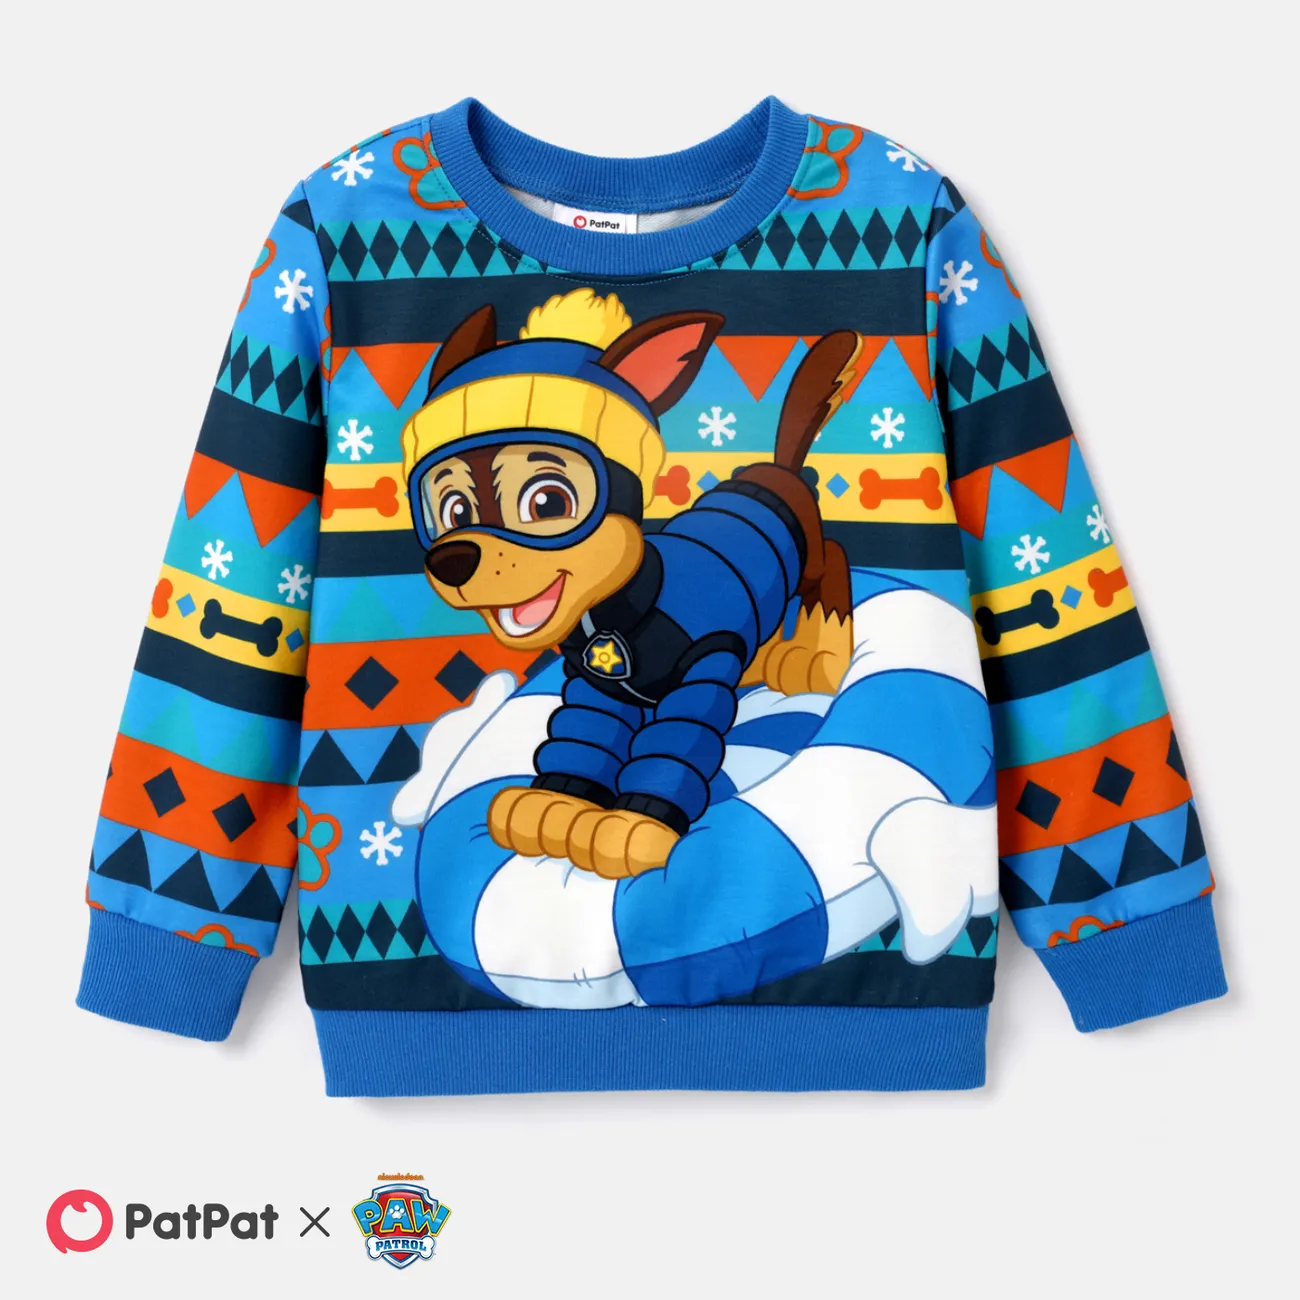 PAW Patrol Toddler Girl/Boy Character Print Long-sleeve Pullover Sweatshirt  Only $9.99 PatPat US Mobile